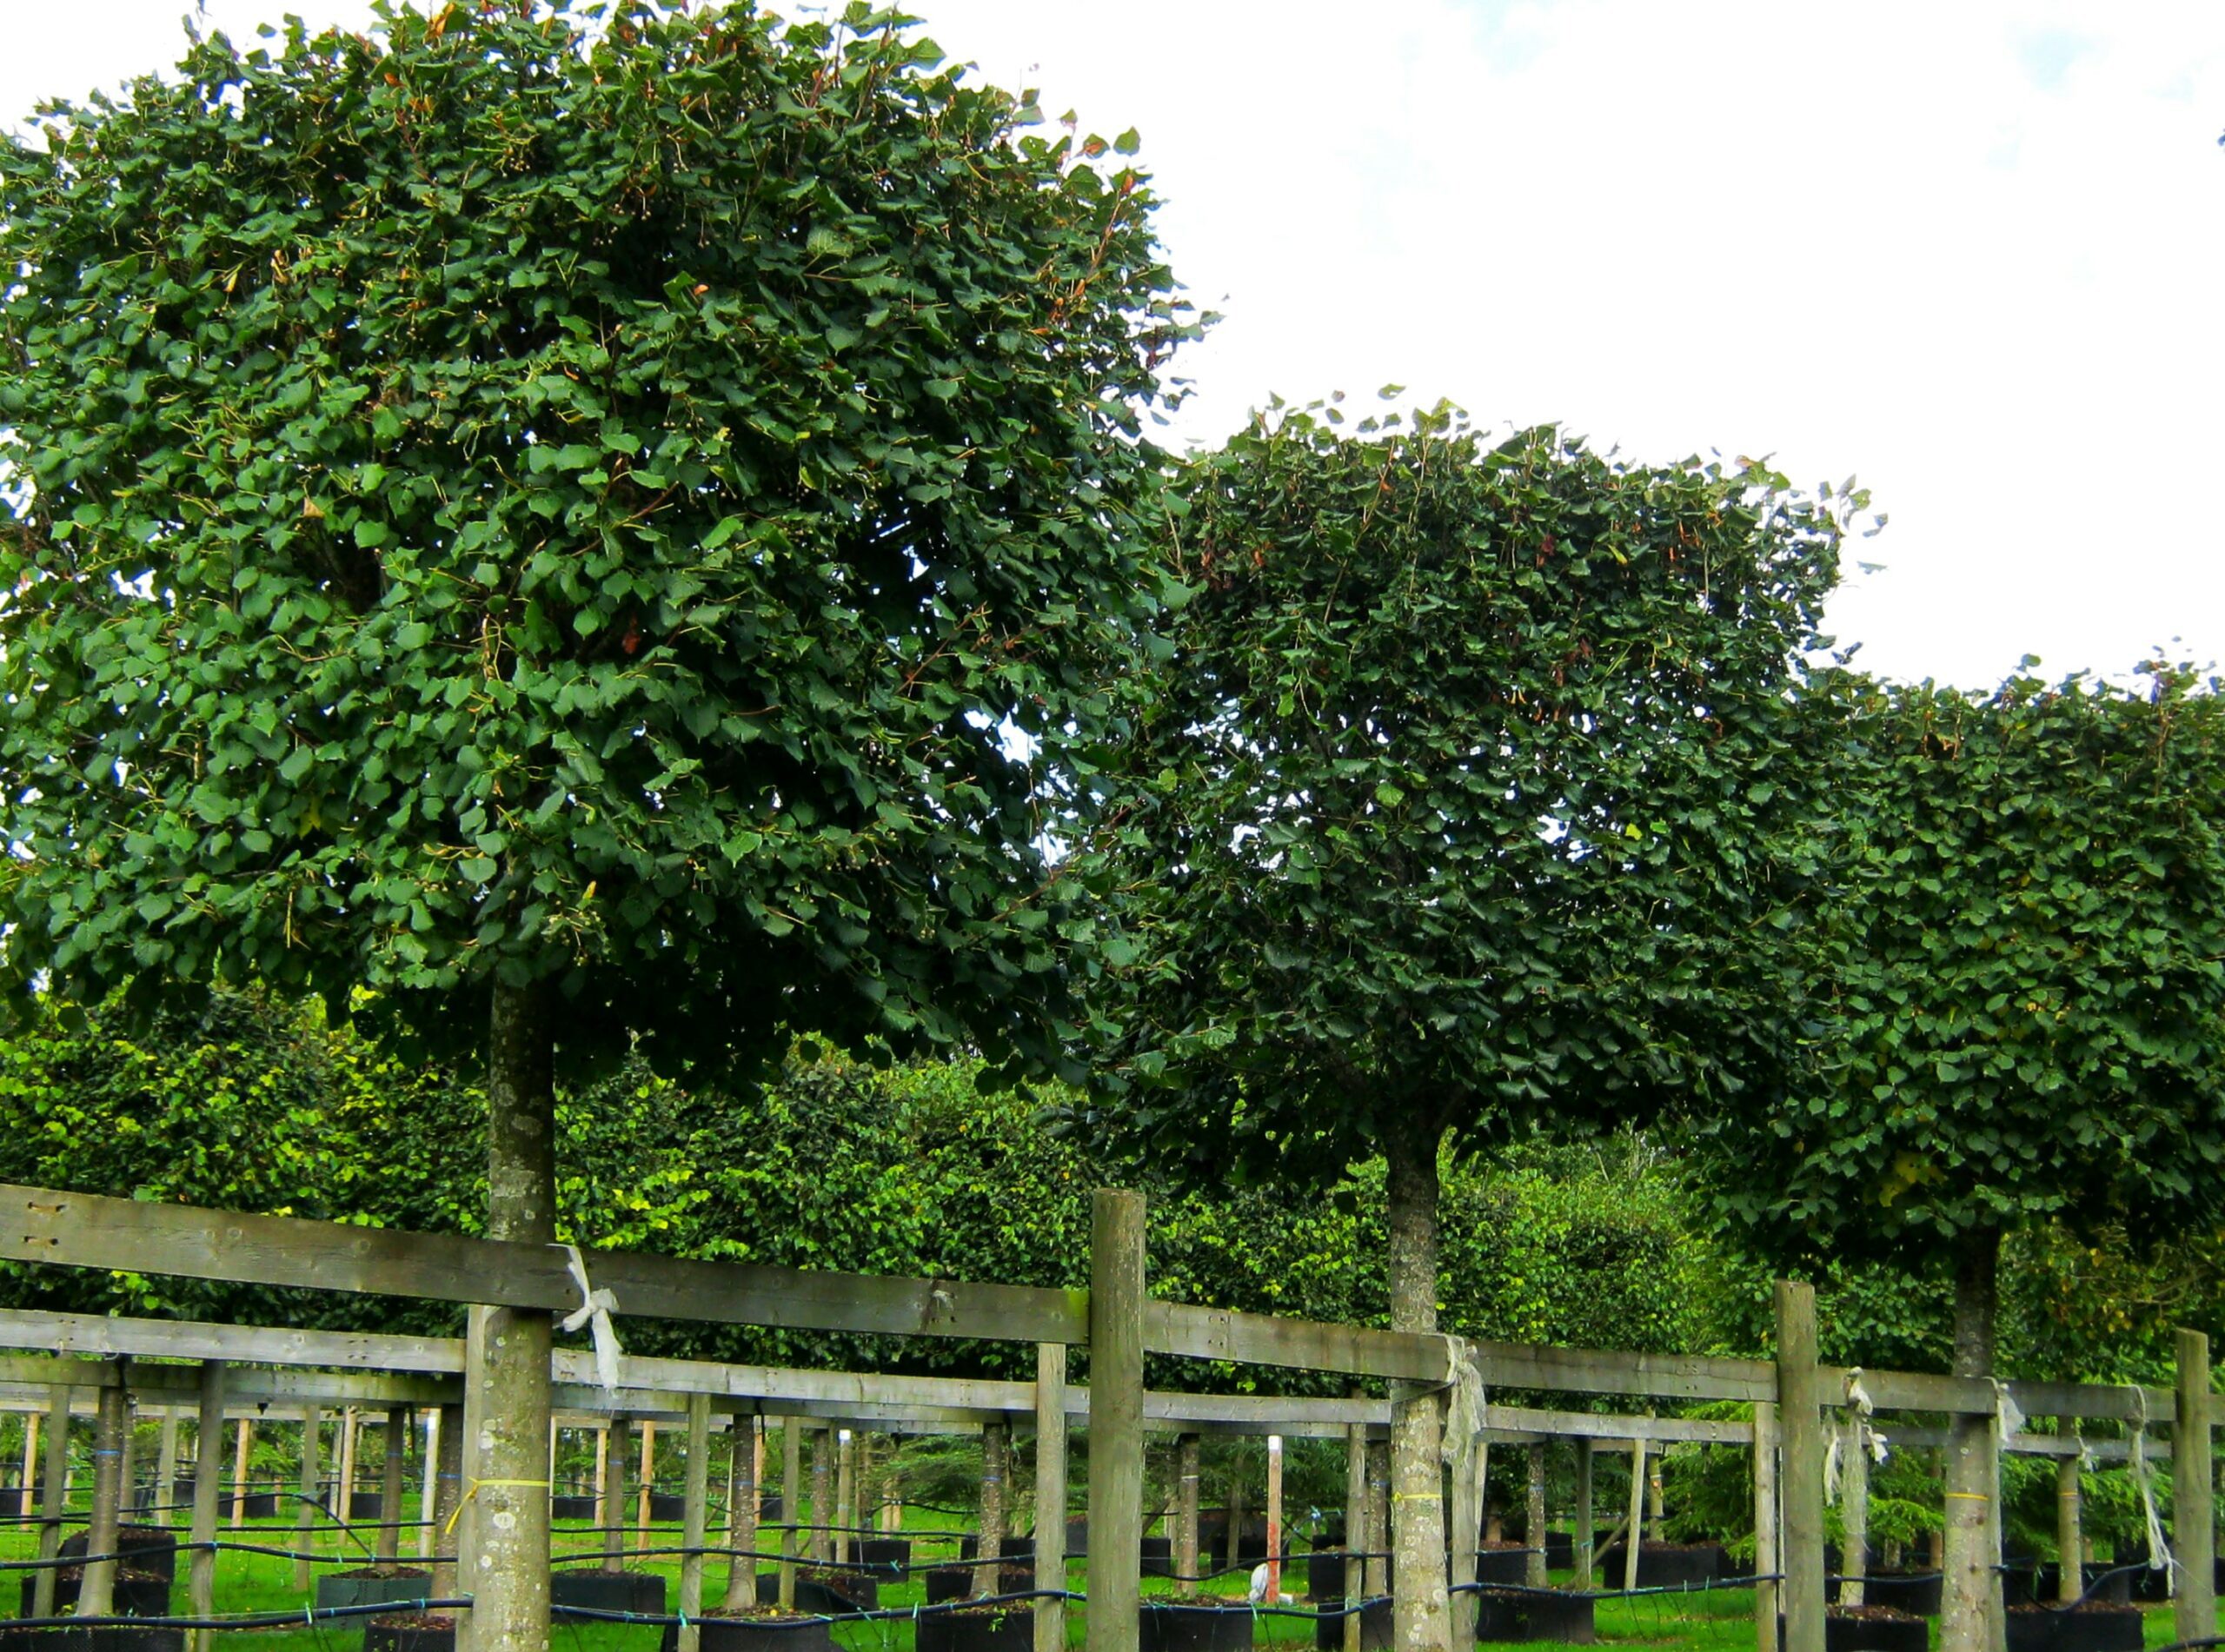 Tilia plattyphllos cube head shaped trees growing in rows in containers